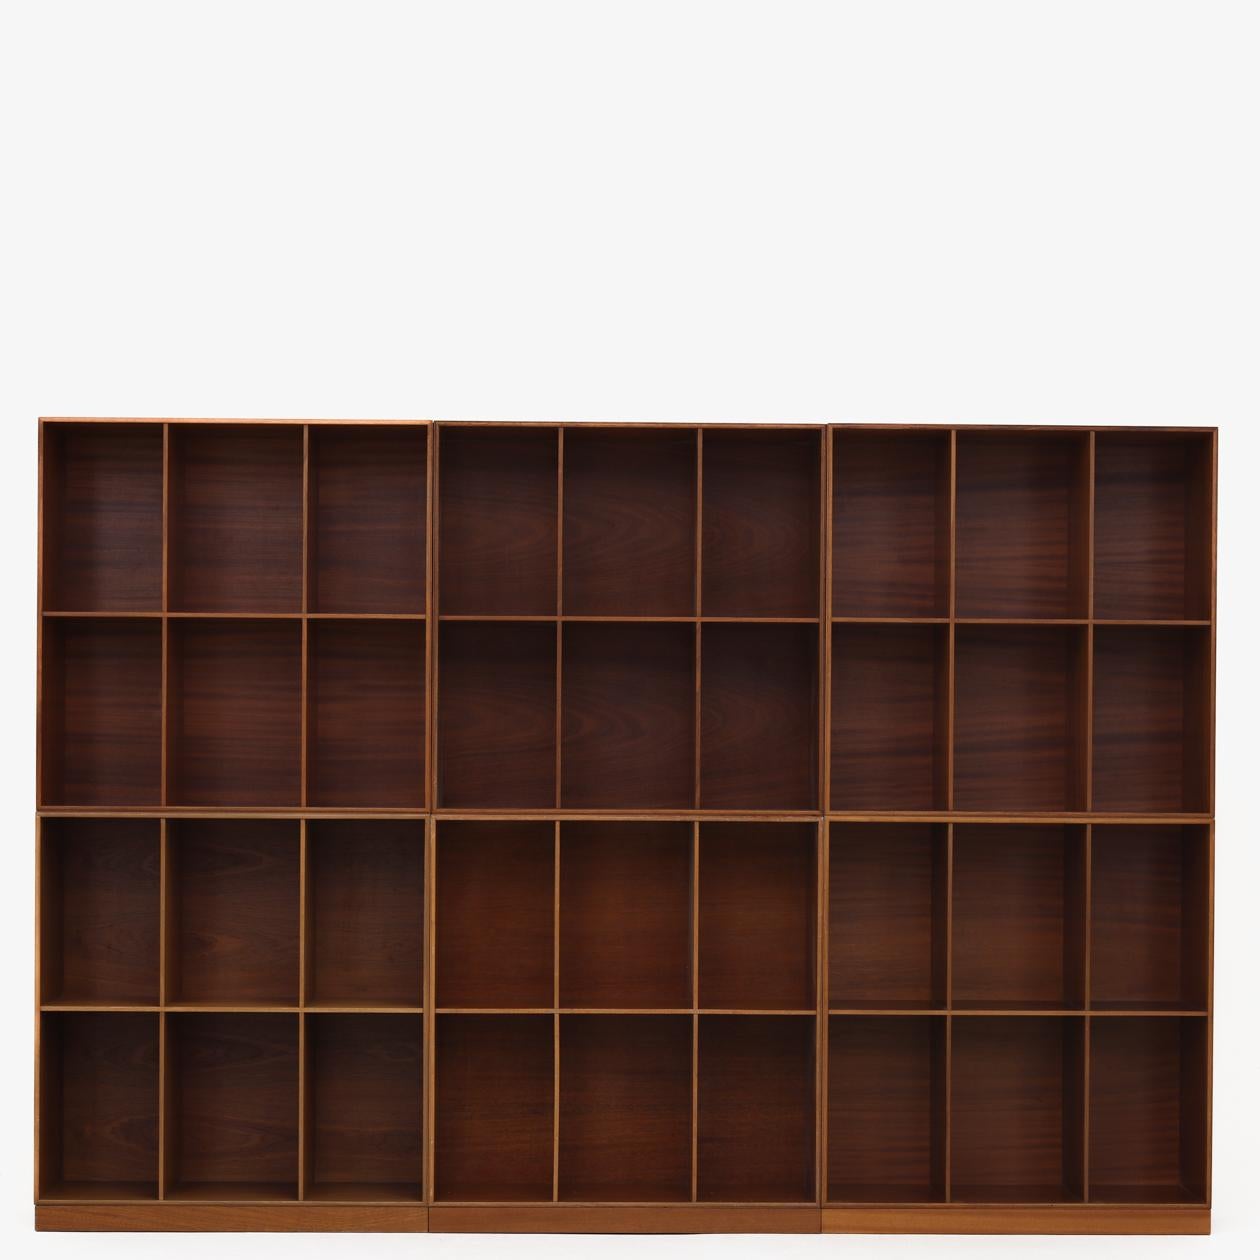 Mahogany bookcases by architect Mogens Koch for master cabinetmaker Rud. Rasmussen. Price is per bookcase, as we offer the bookcases in any number of units and we often have them in mahogany, oak, elm, Oregon pine and more.